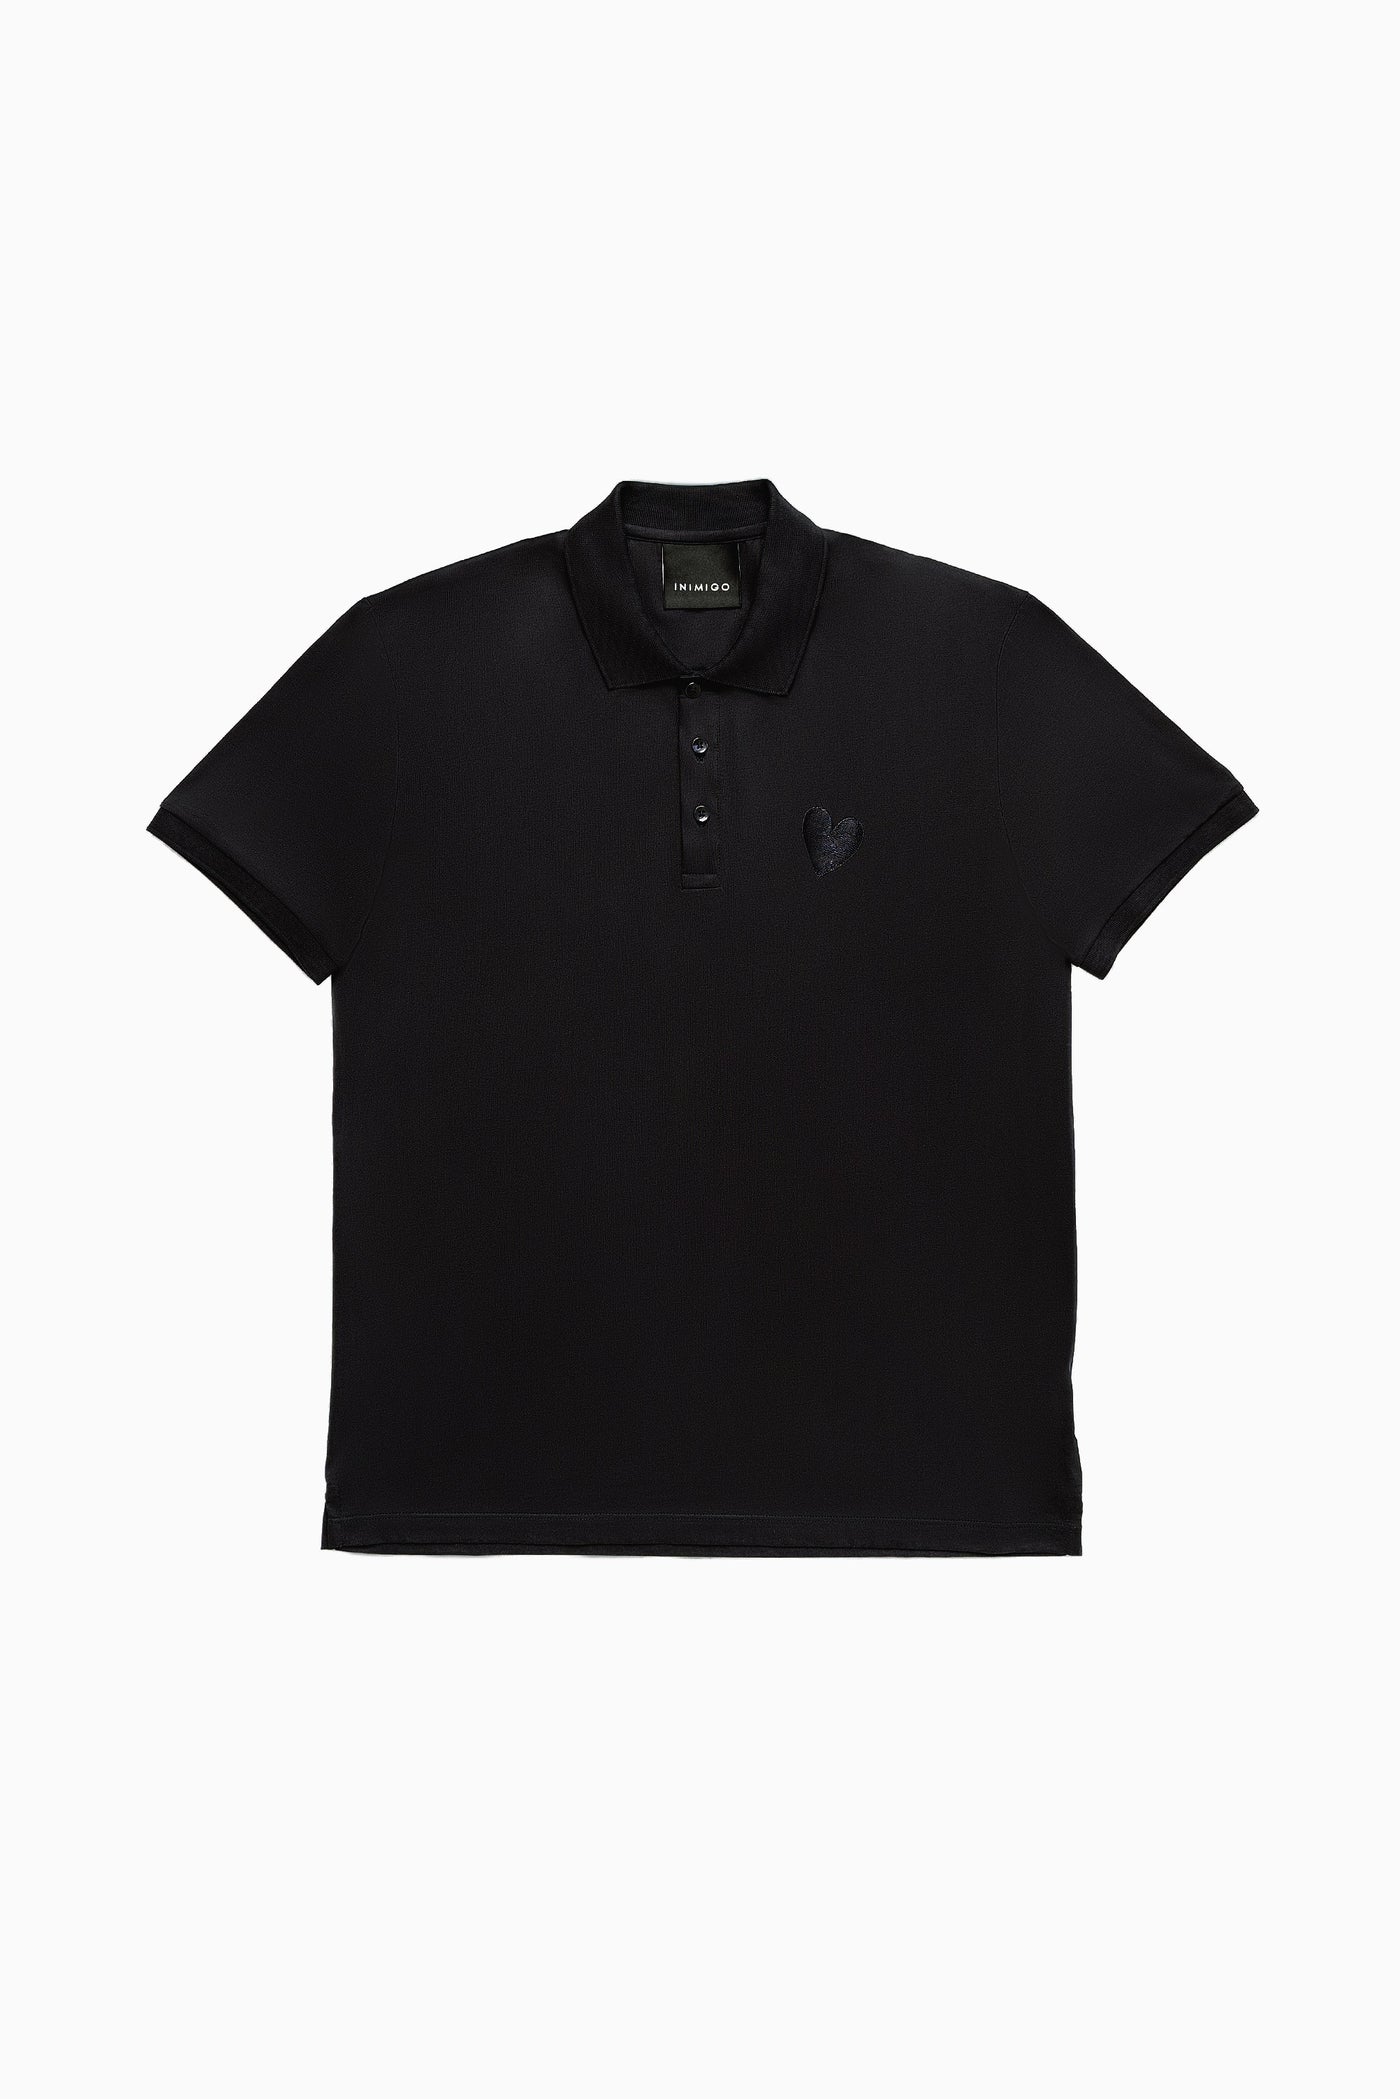 Classic Embroidery Heart Jersey Black Polo